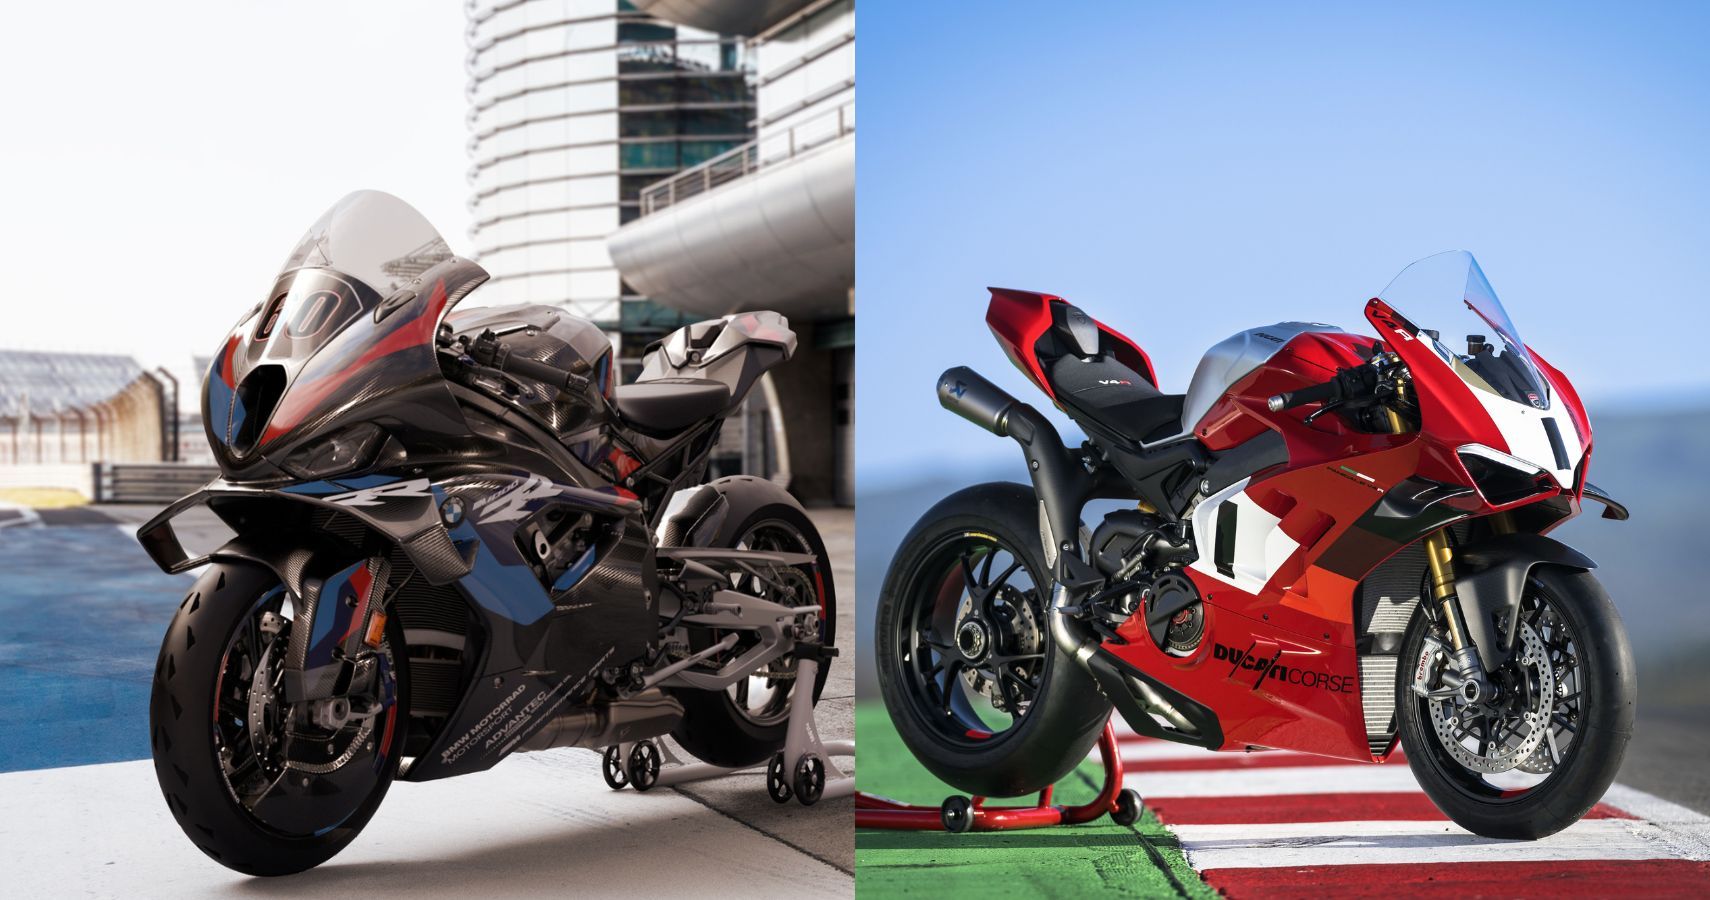 Here's Why The BMW M 1000 RR Is No Match For The Ducati Panigale V4 R